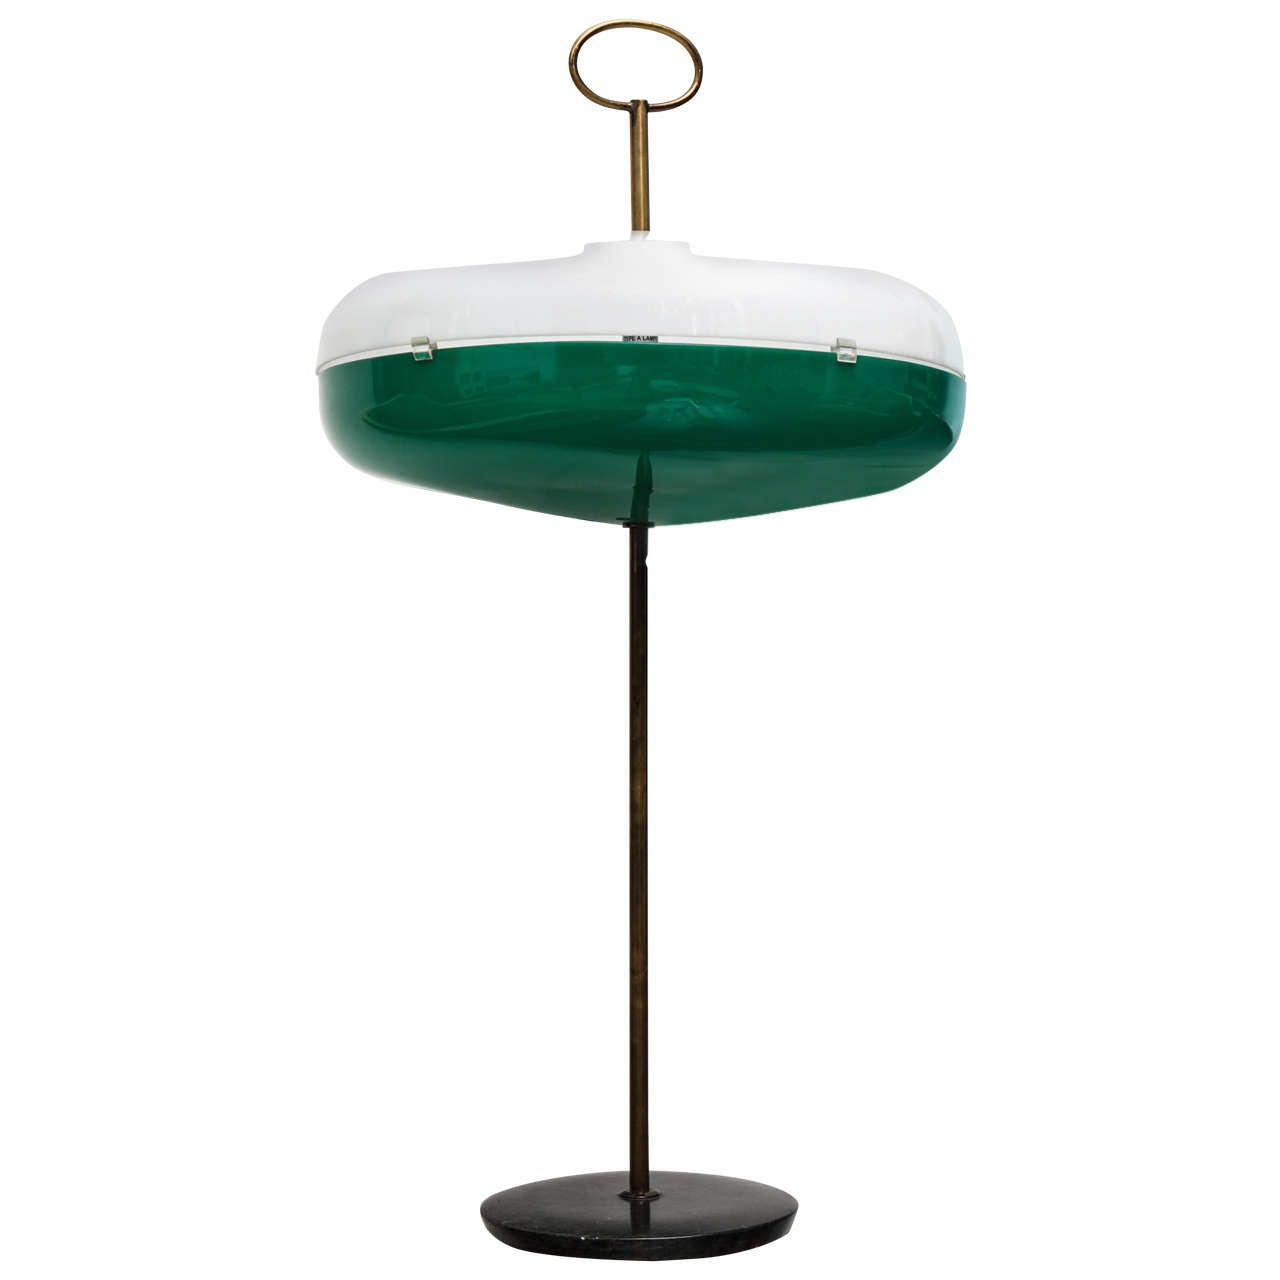 Two-piece shade of perspex in white and green, concealing three candelabra sockets.  Brass center rod and finial, and finely-shaped stone base.  A great looking lamp of great quality that utilizes typical elements of the period.